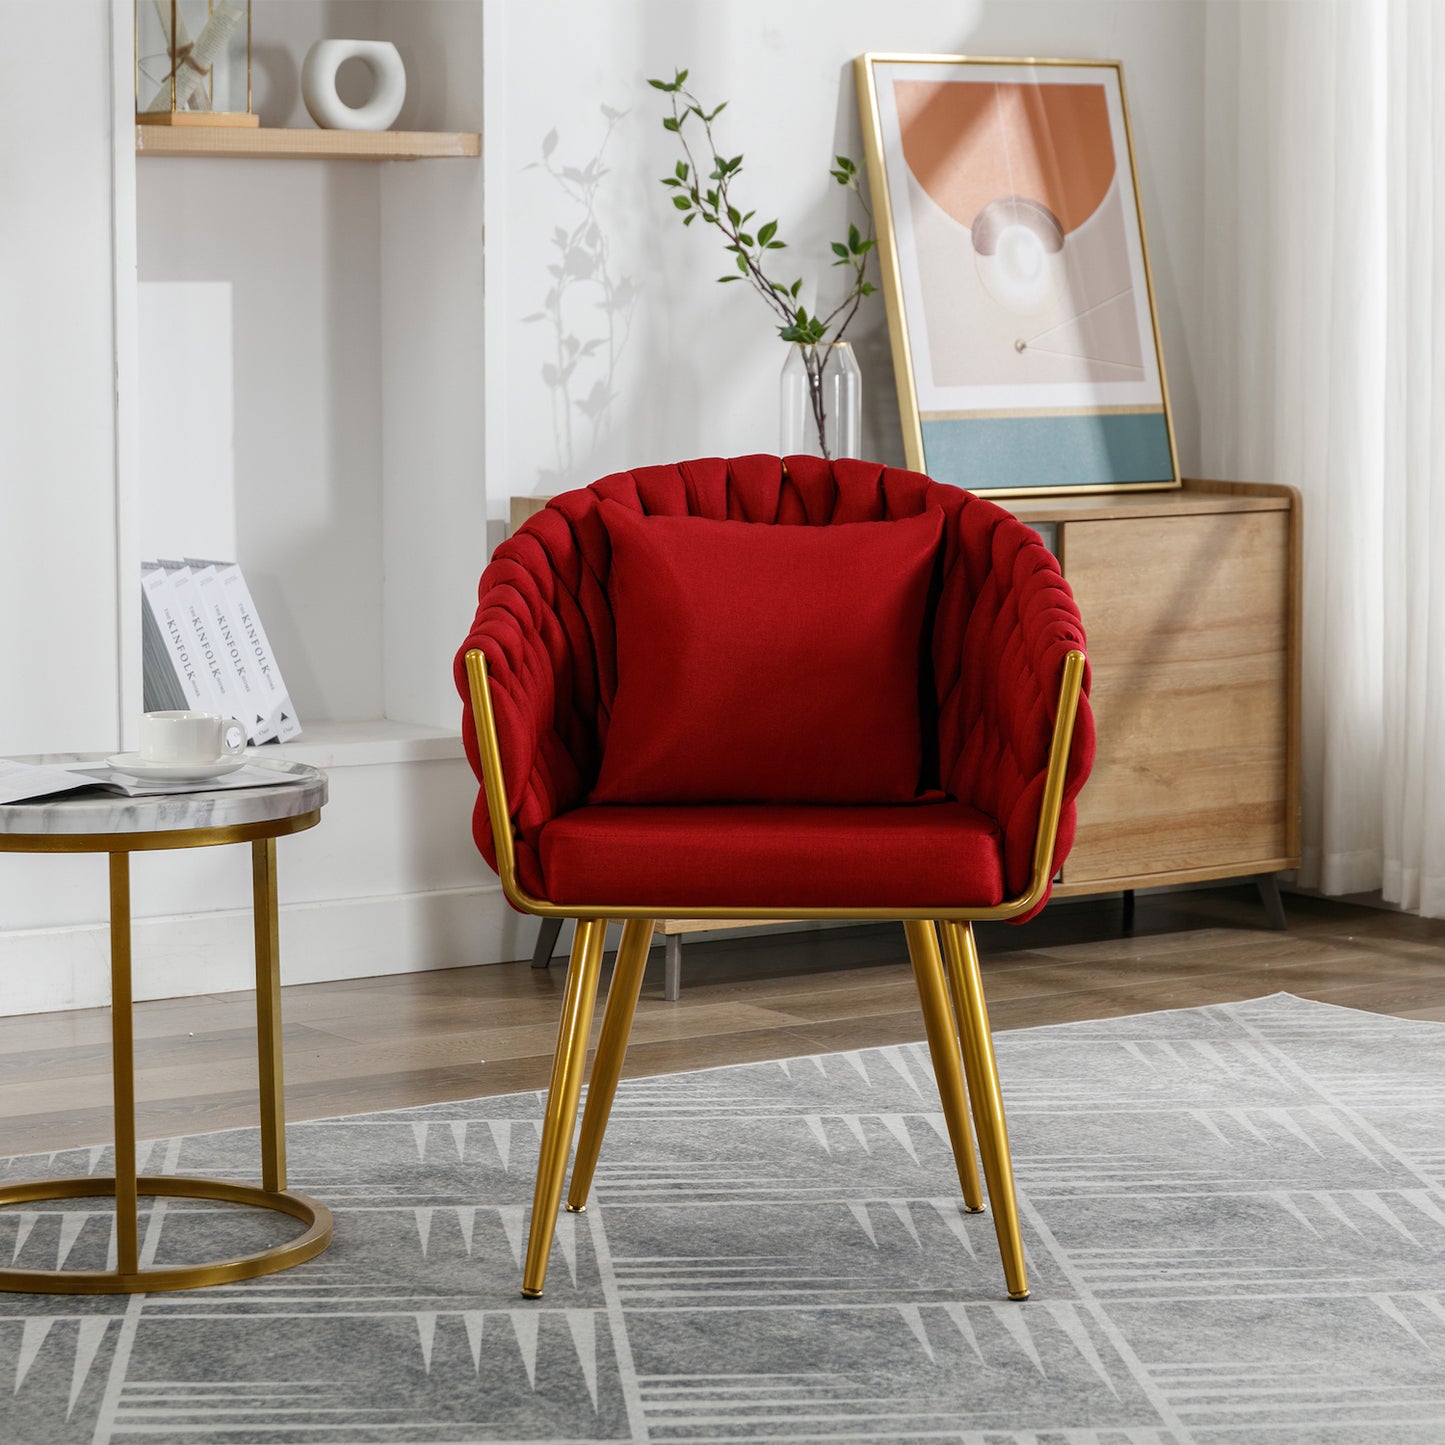 Léa Handwoven Linen Accent Chair with Golden Frame - Red